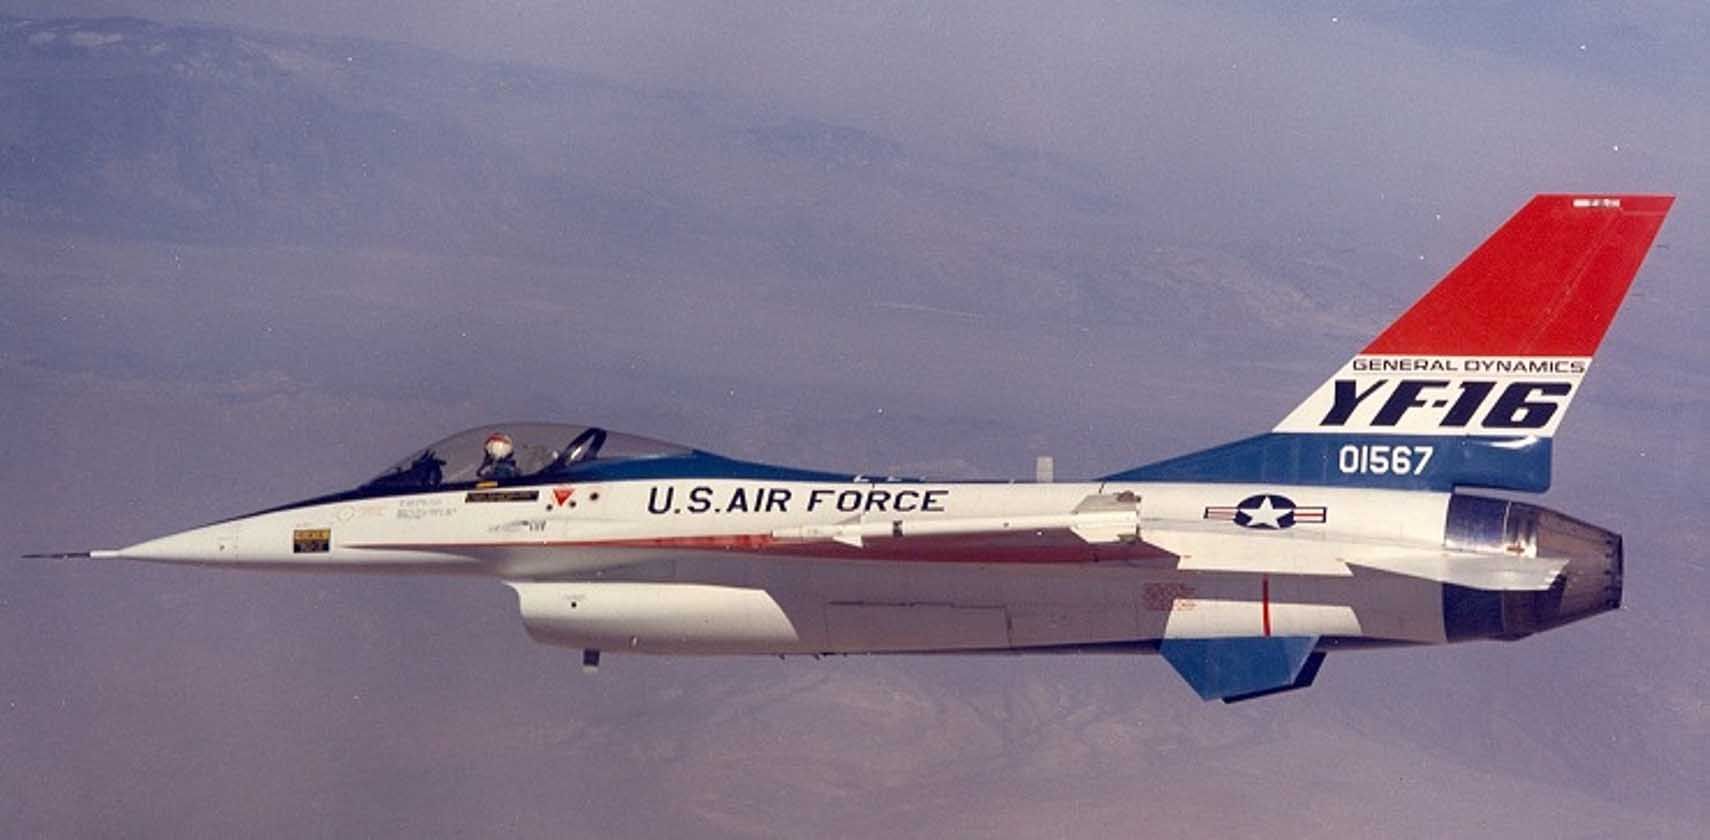 YF-16 Completed Its Maiden Flight Over Edwards Air Force Base, California On Feb. 2, 1974